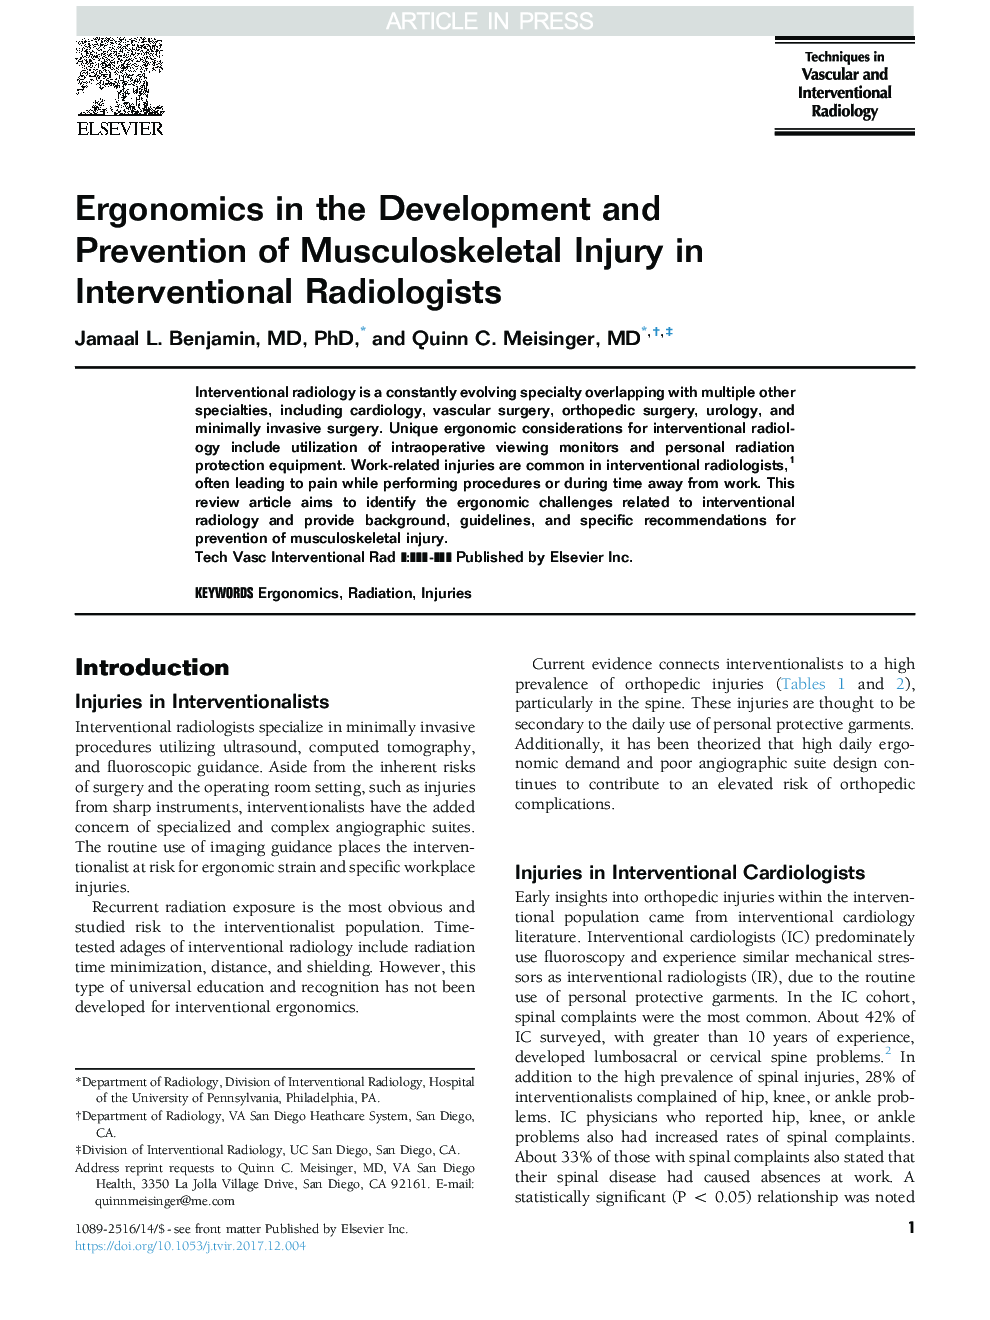 Ergonomics in the Development and Prevention of Musculoskeletal Injury in Interventional Radiologists